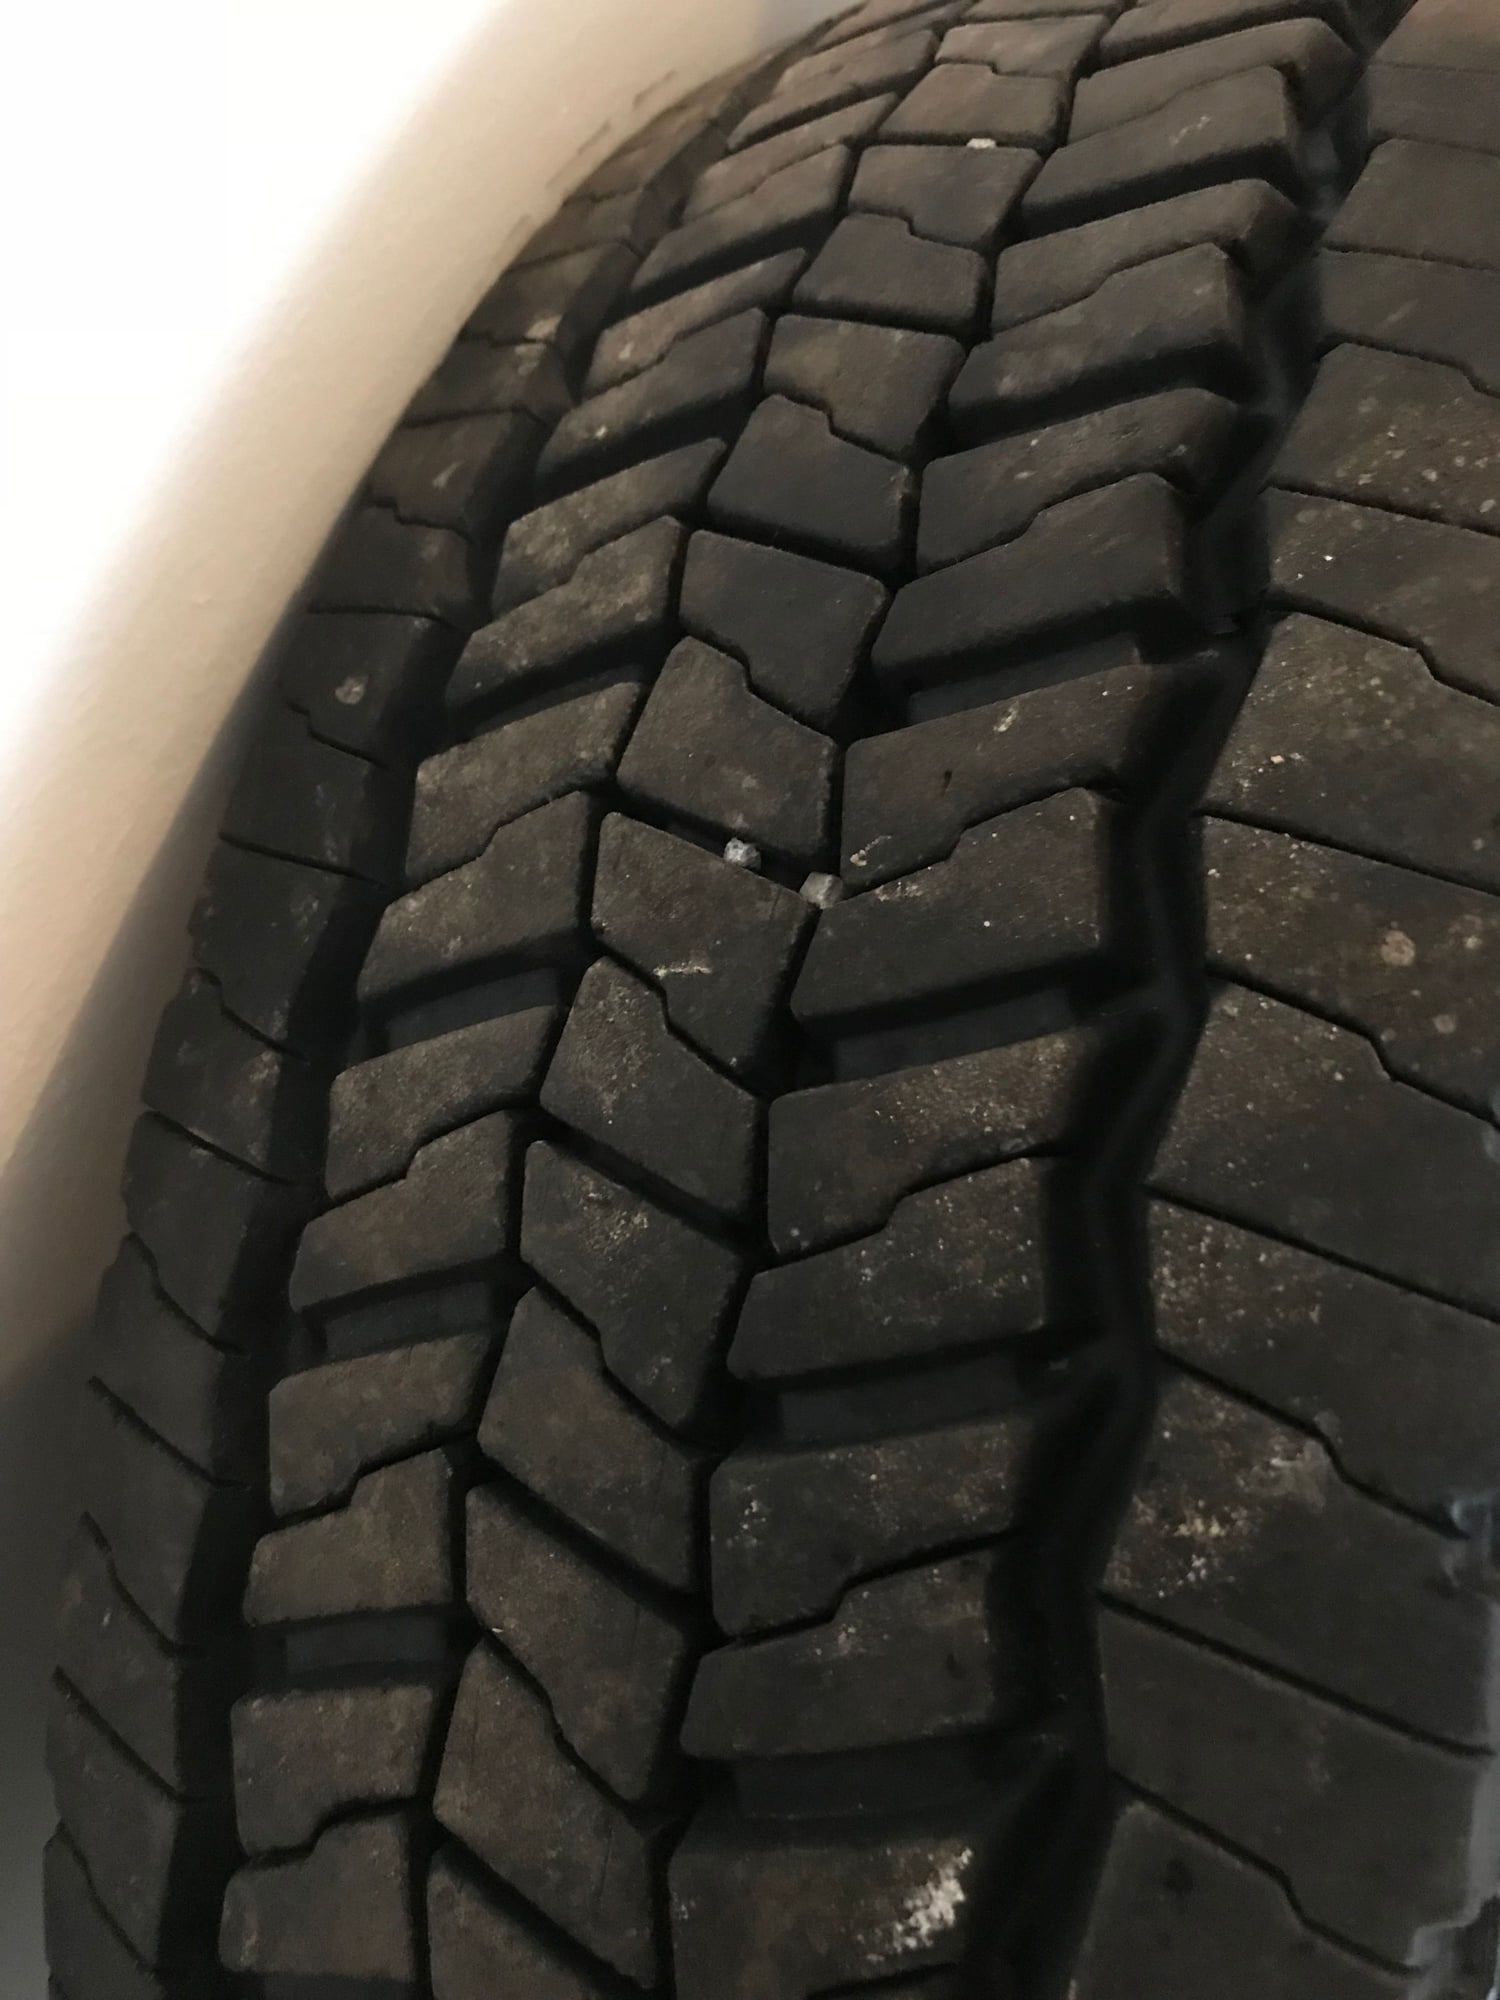 Wheels and Tires/Axles - 2019 450 wheels tires - Used - 2017 to 2019 Ford F-450 Super Duty - Cleveland, OH 44133, United States